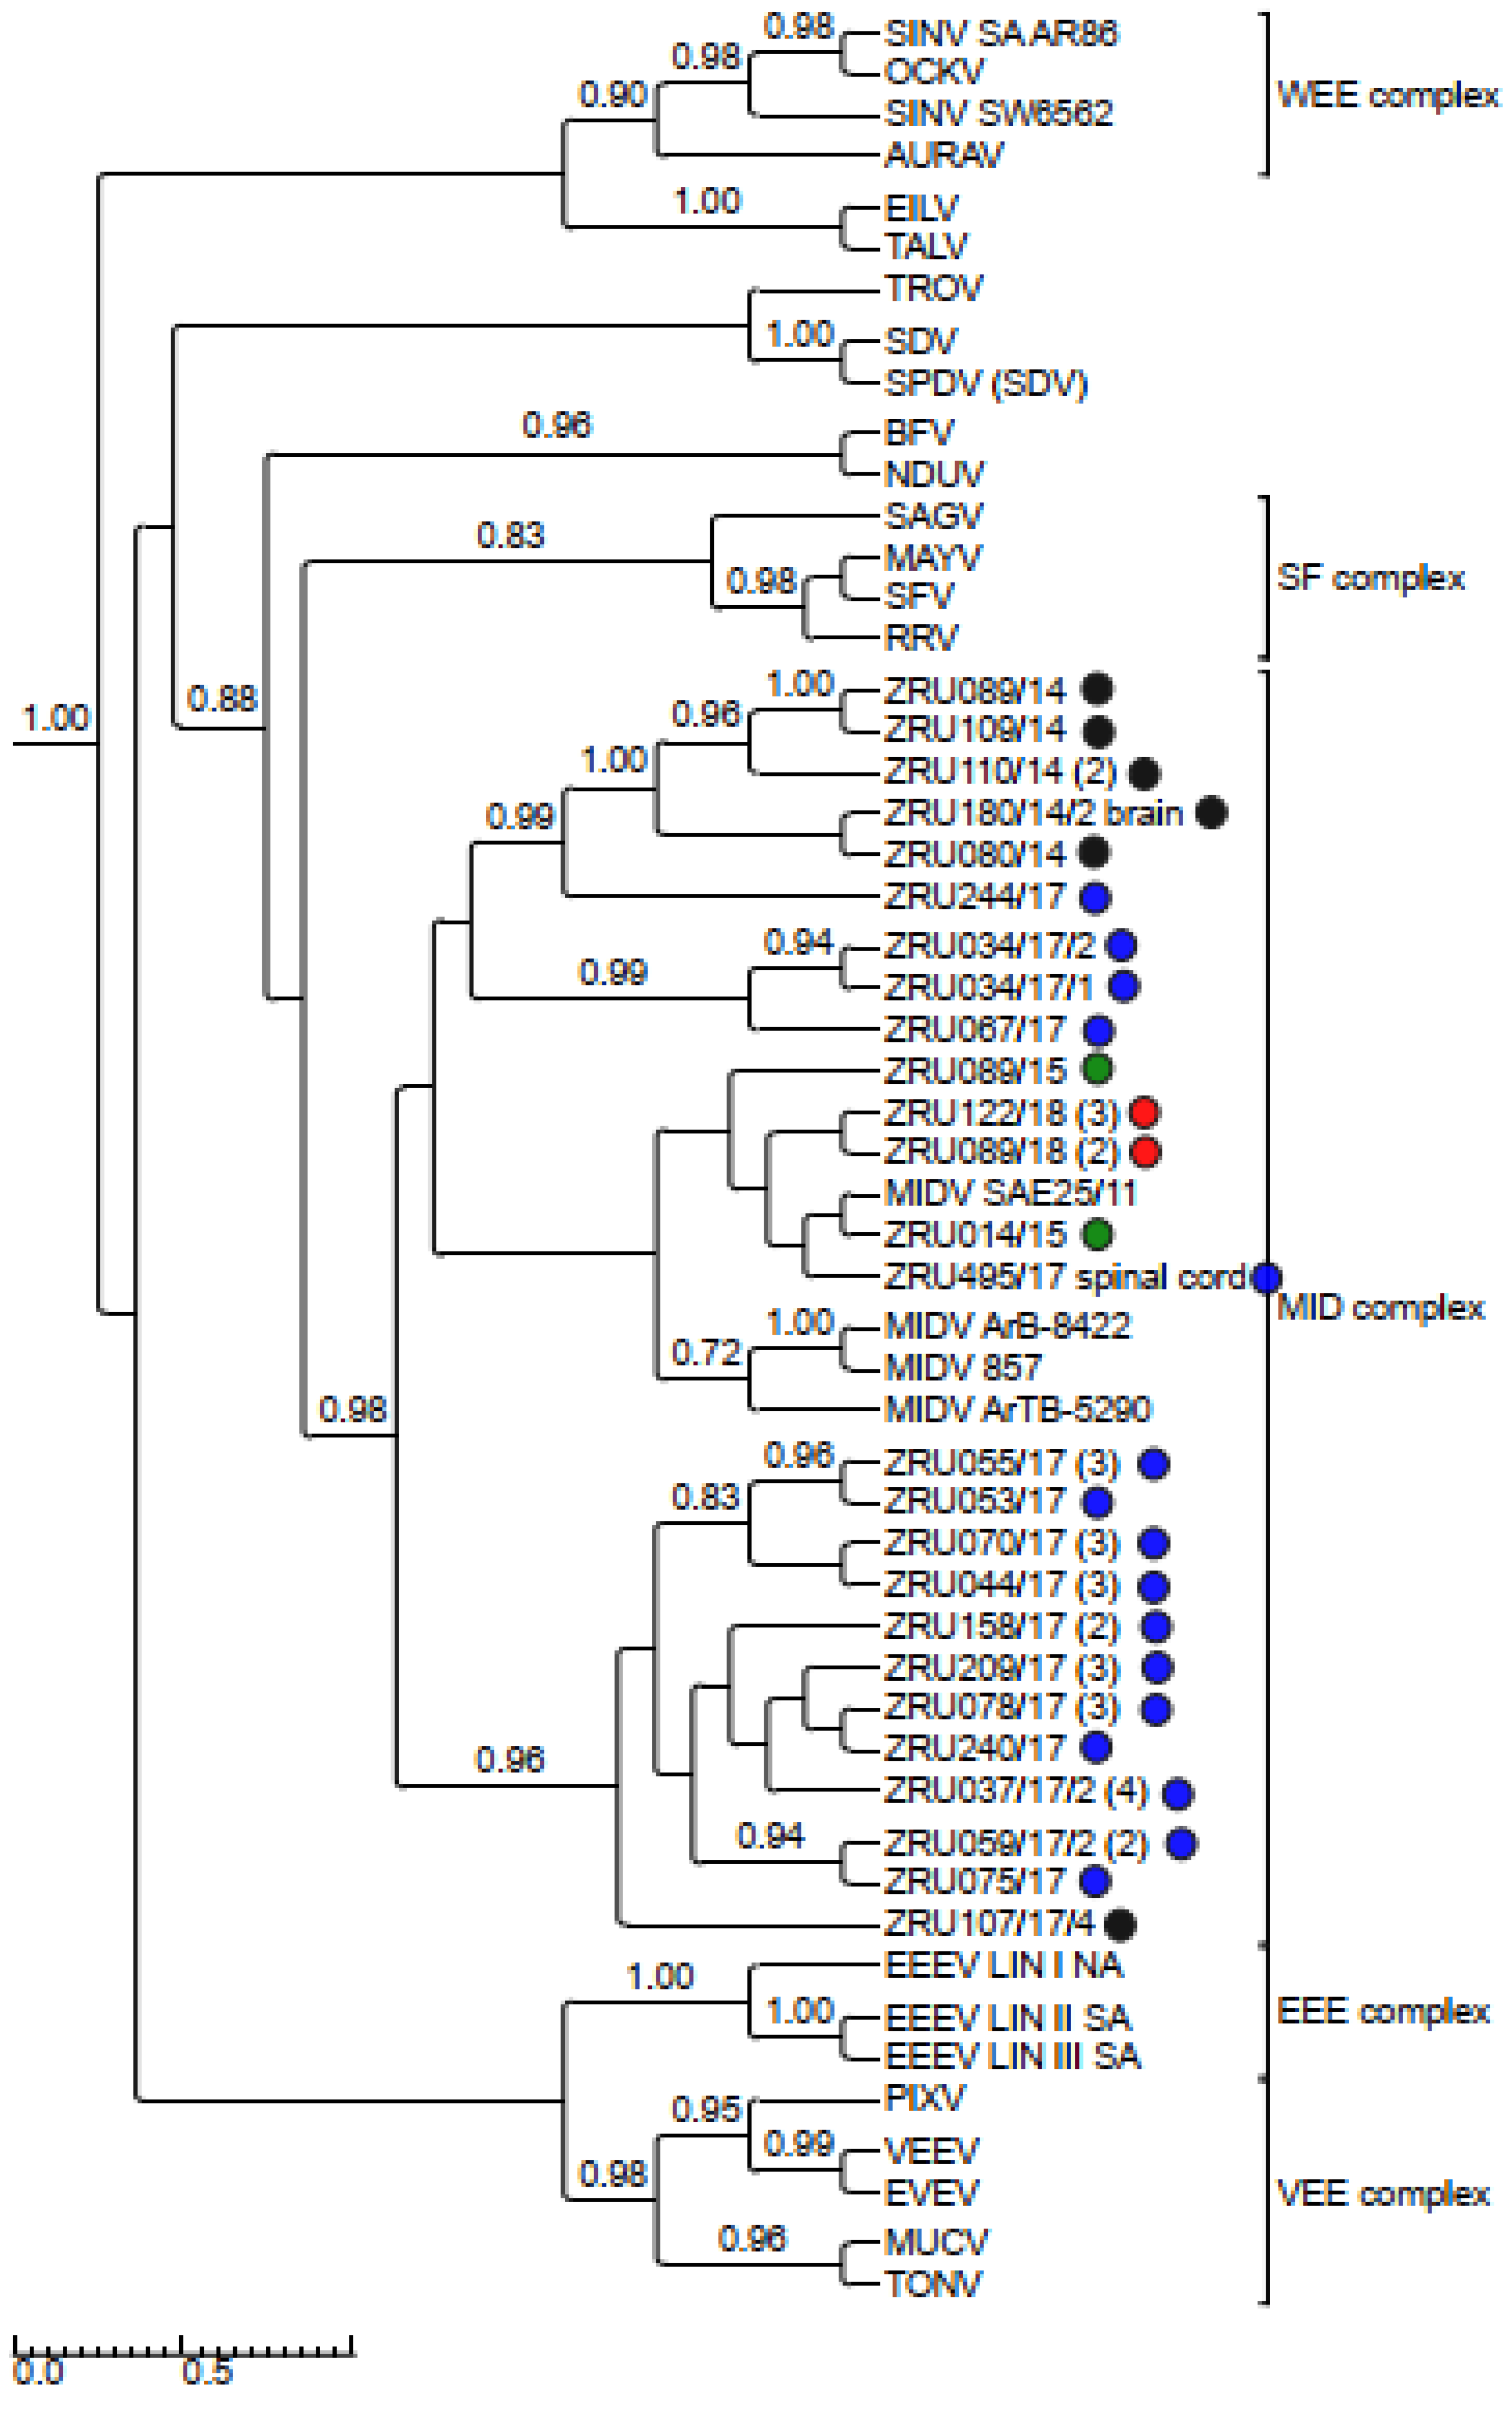 Viruses | Free Full-Text | Epidemiological and Genomic Characterisation of  Middelburg and Sindbis Alphaviruses Identified in Horses with Febrile and  Neurological Infections, South Africa (2014–2018)